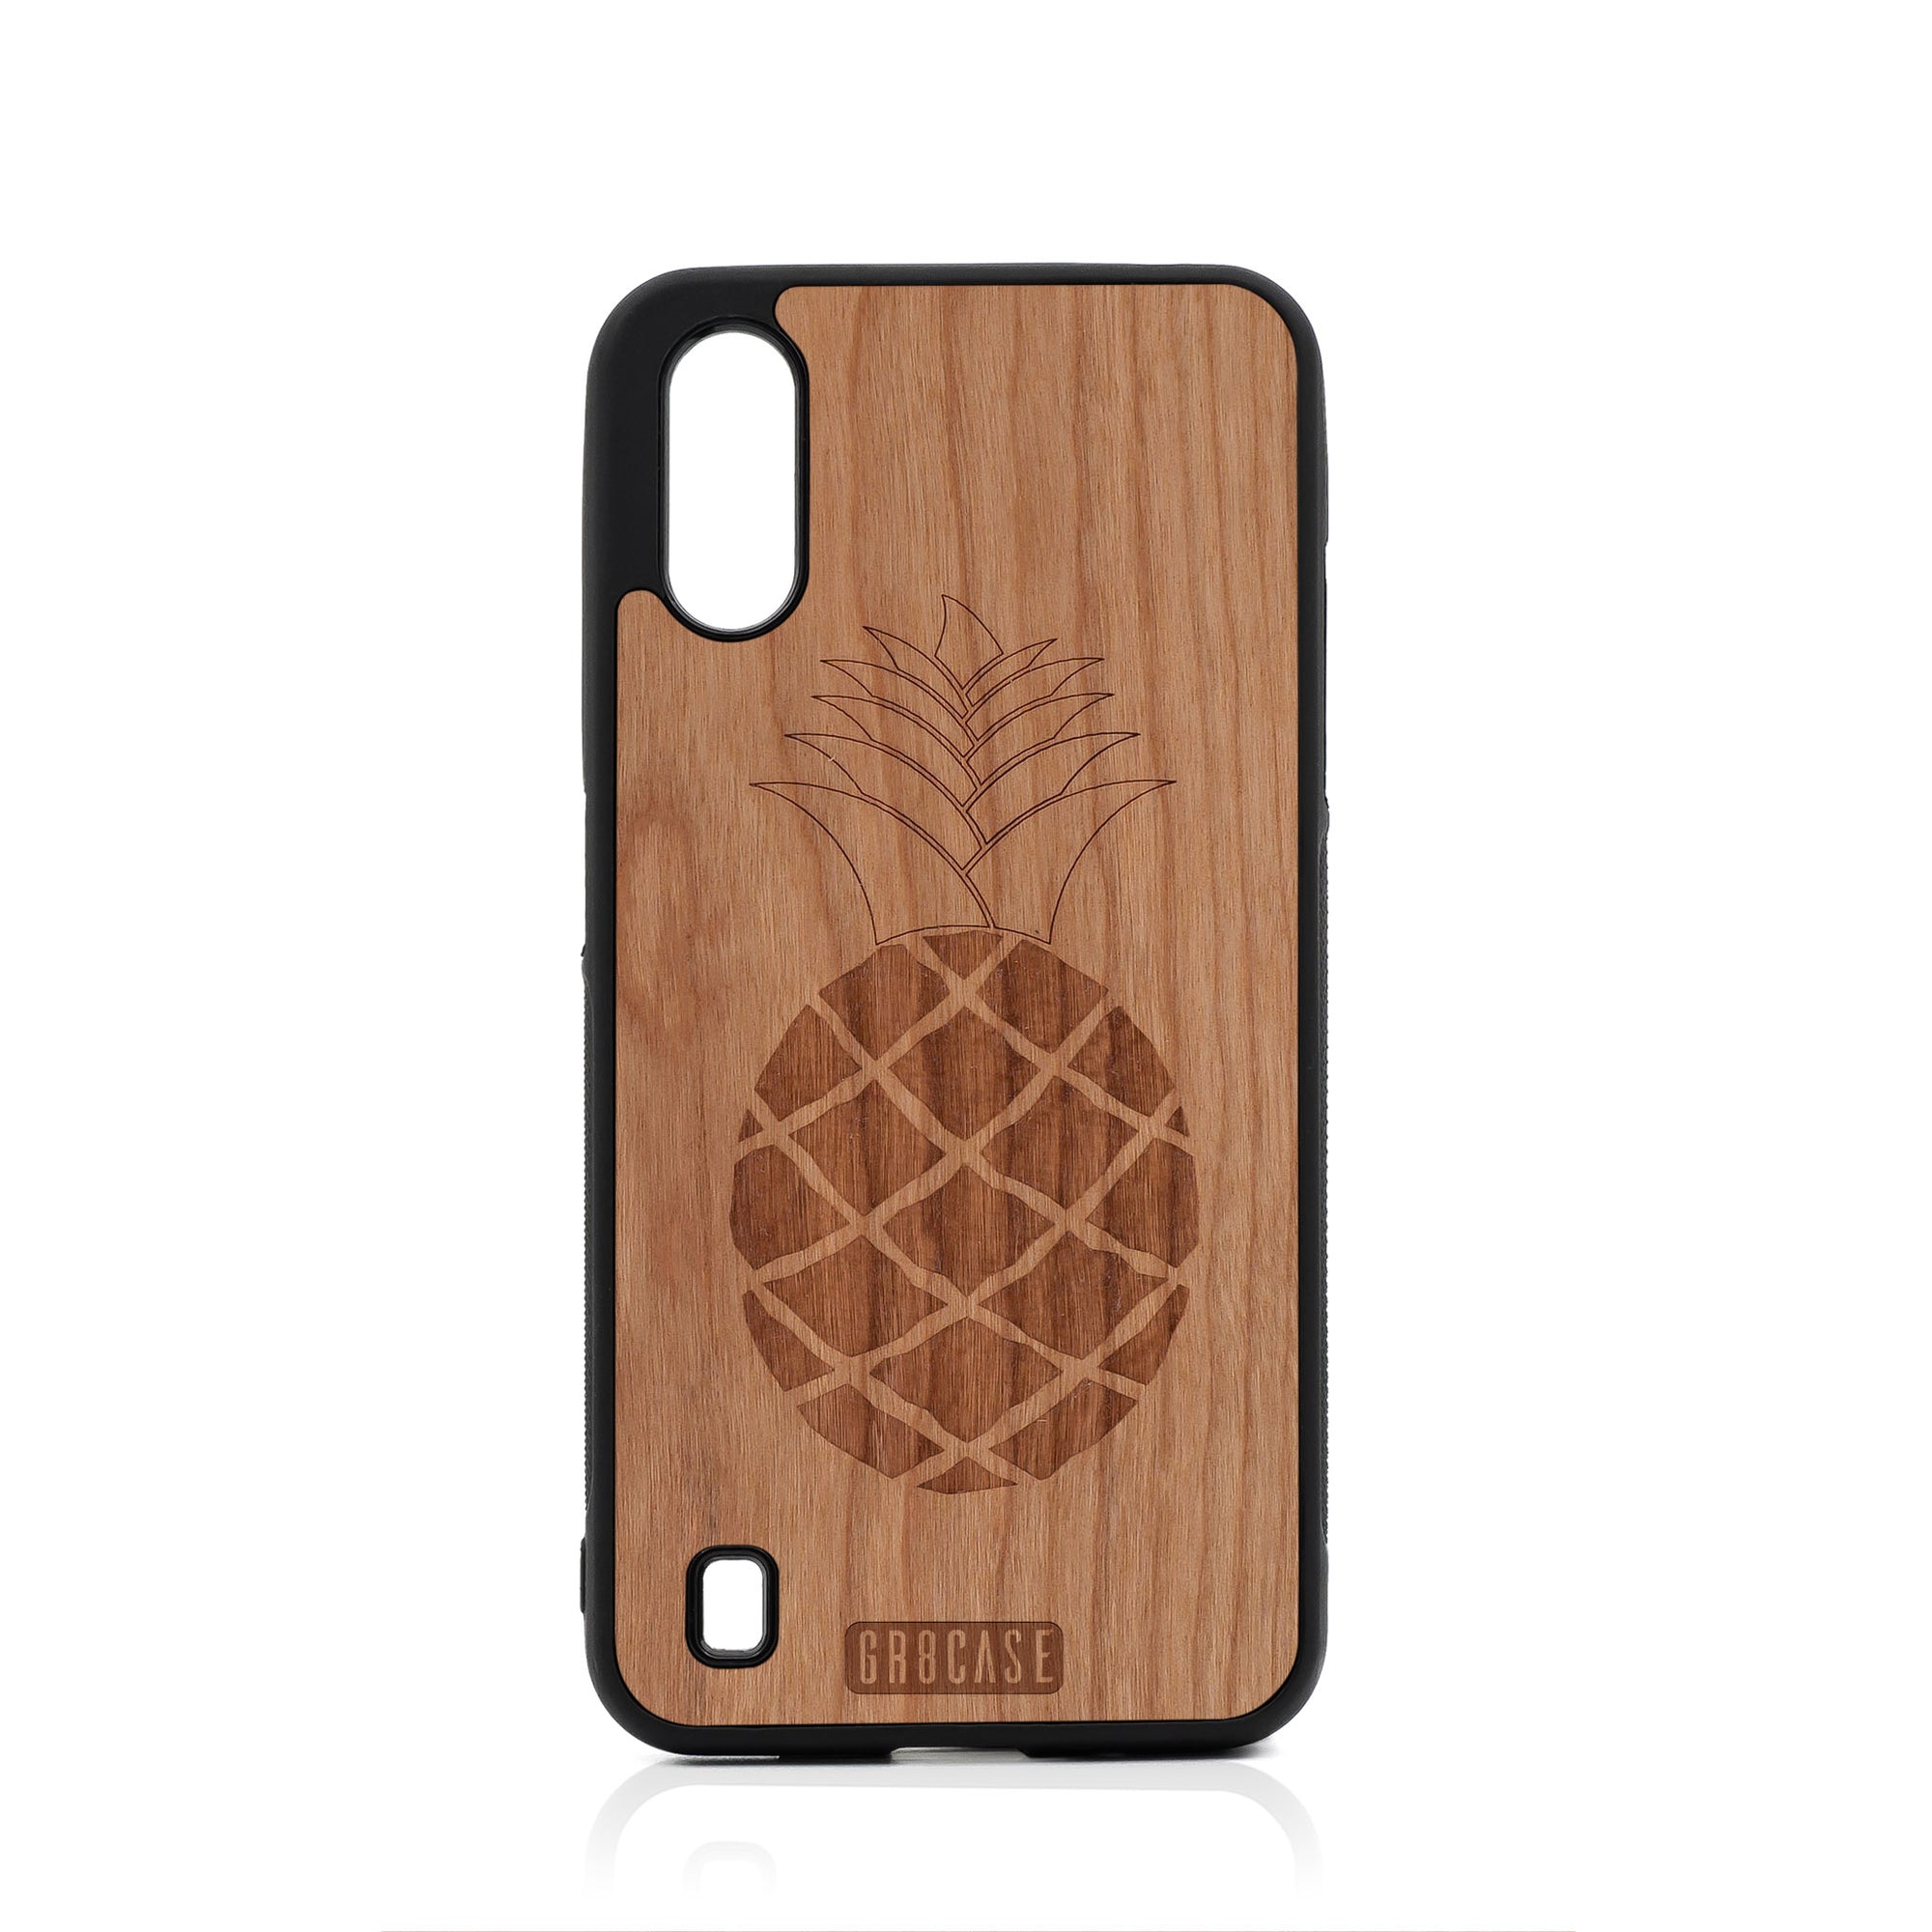 Pineapple Design Wood Case For Samsung Galaxy A01